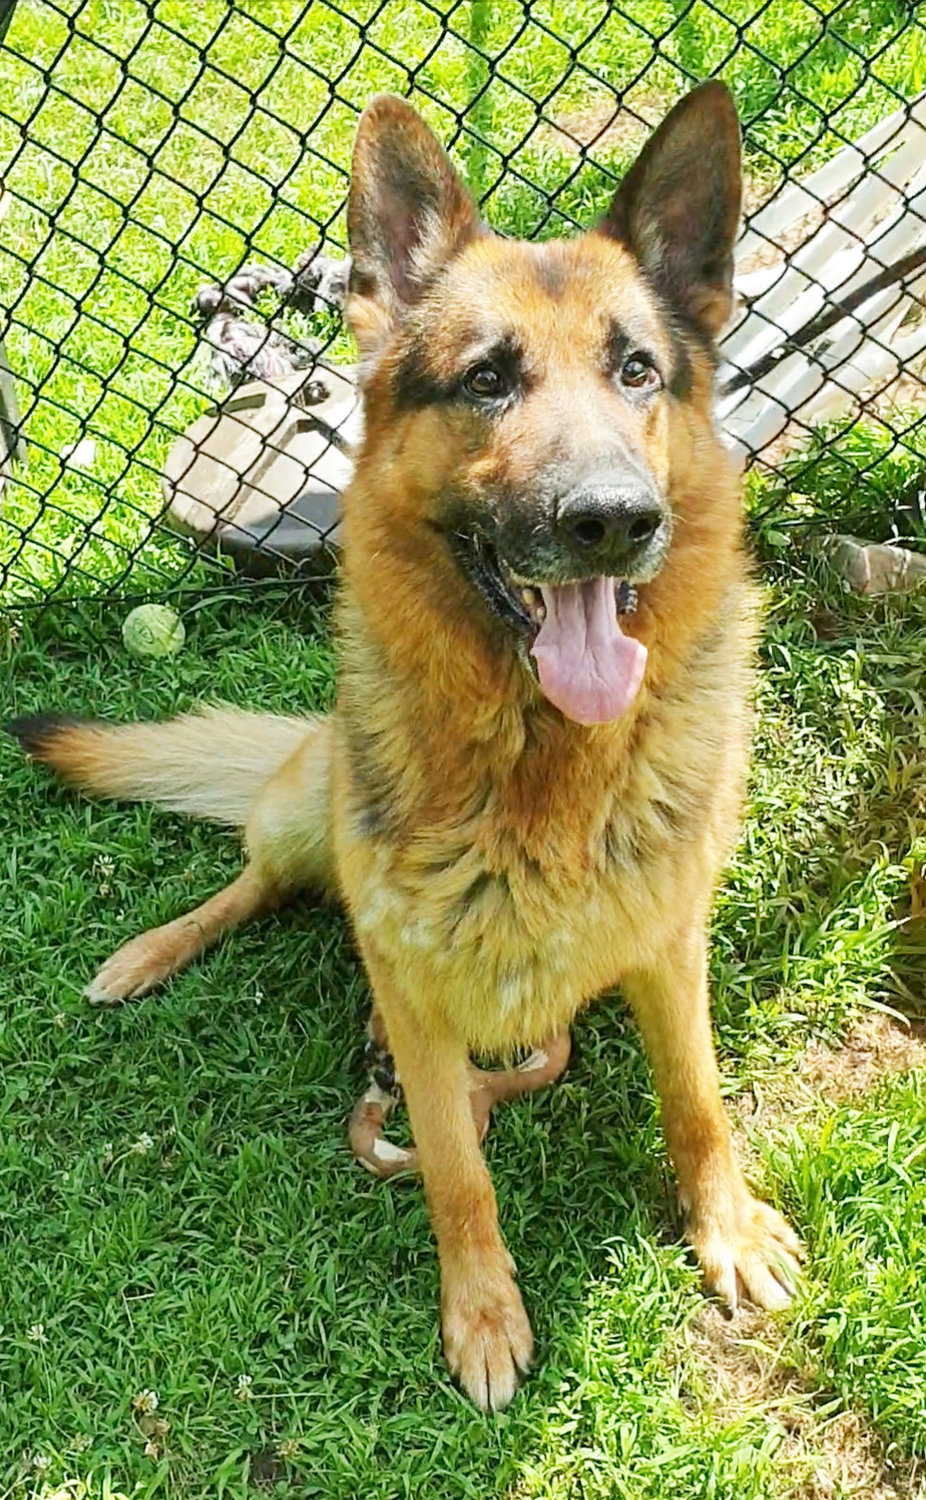 Four German Shepherds rescued at the property, including the one pictured, are available for adoption at C.A.R.E.’s shelter in Ferndale.